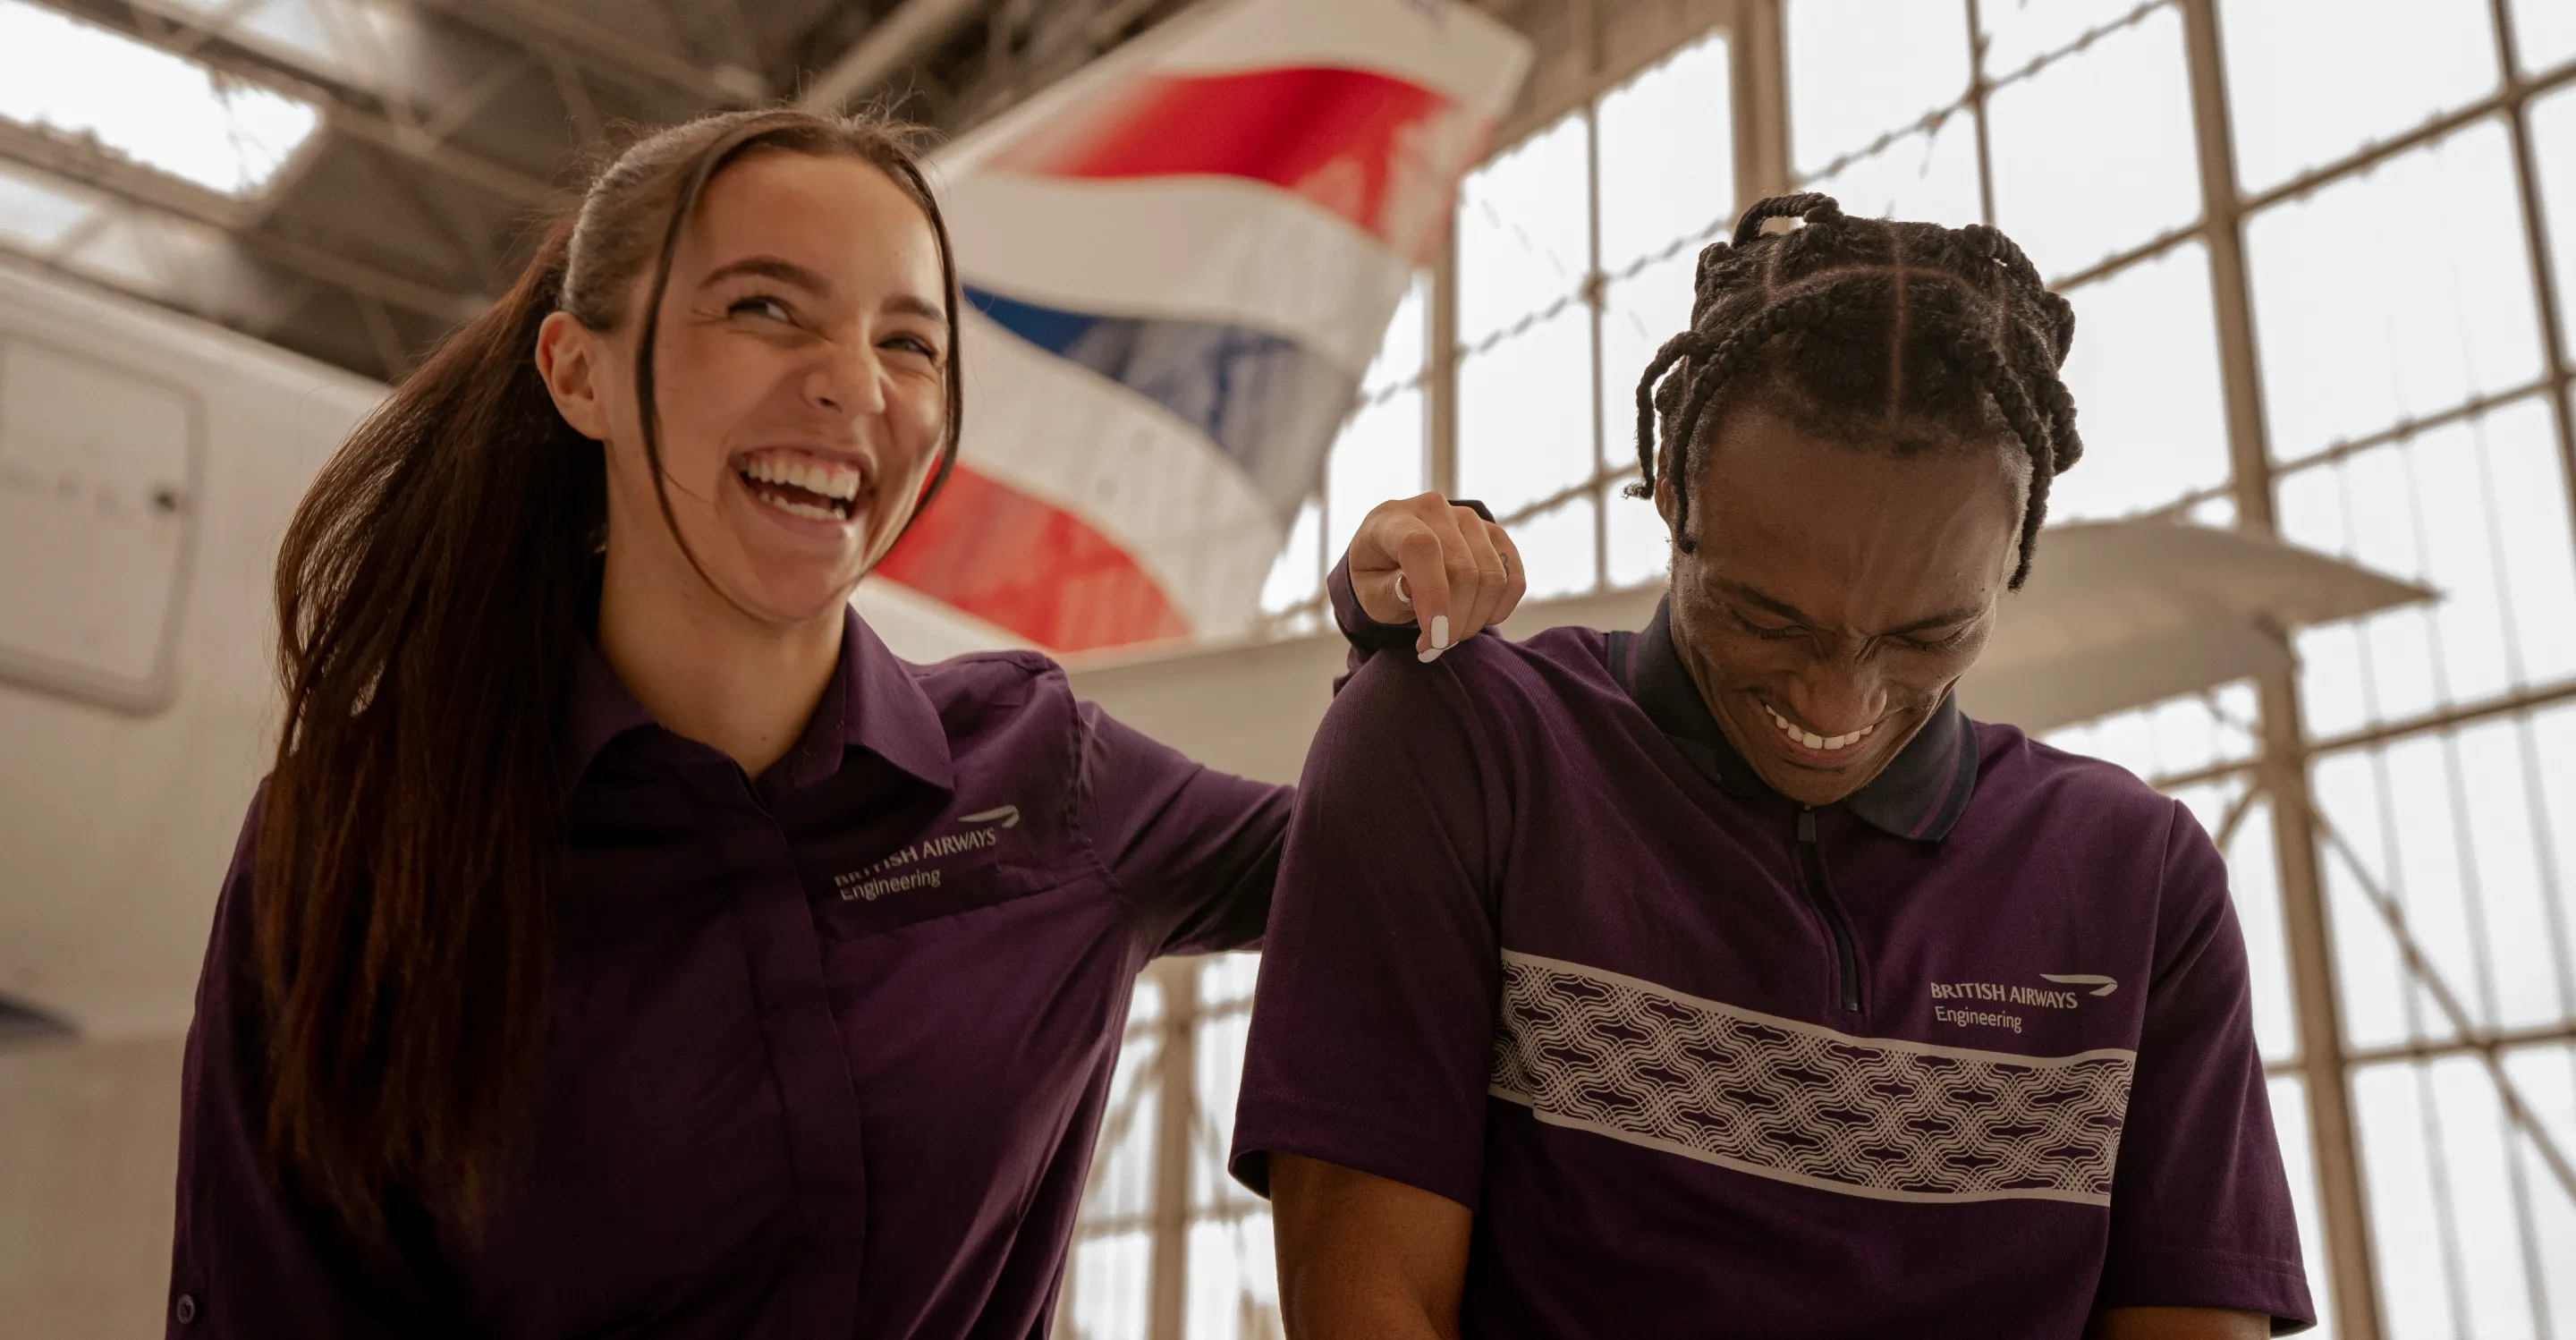 Two British Airways workers laughing